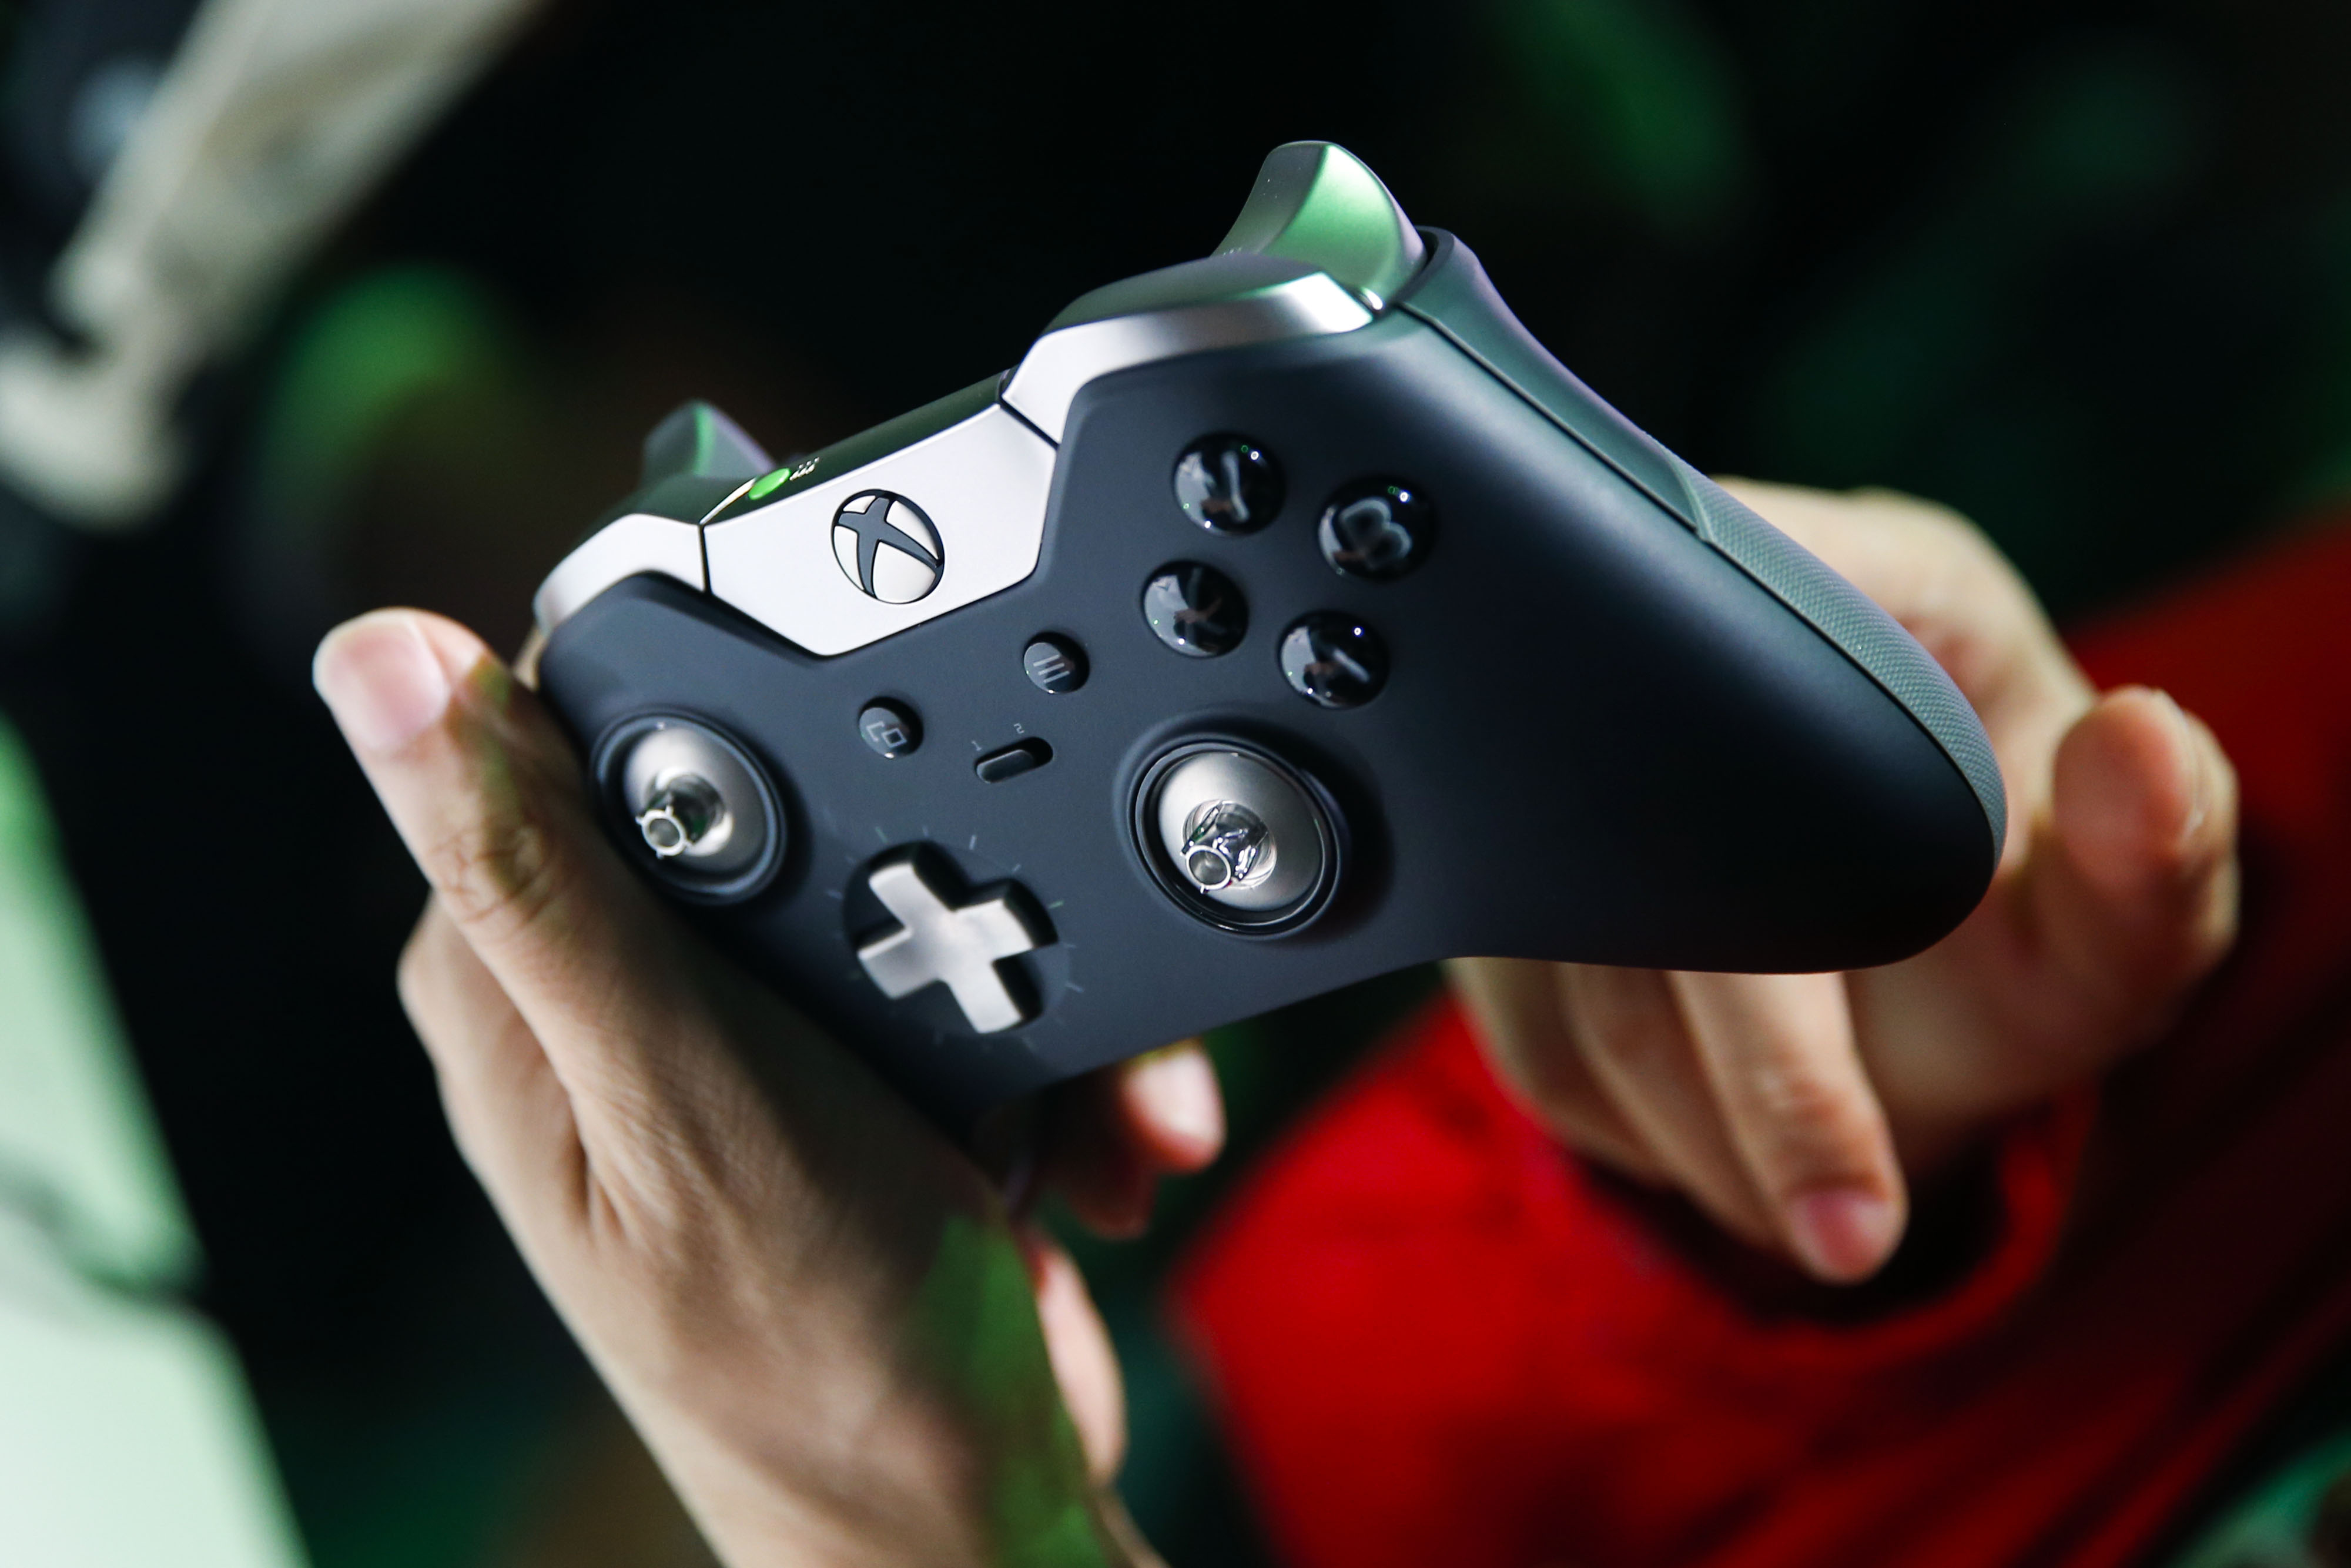 A man holds a Microsoft Corp. Xbox One Elite controller during the E3 Electronic Entertainment Expo in Los Angeles, California, U.S., on Tuesday, June 16, 2015. (Bloomberg&mdash;Bloomberg via Getty Images)